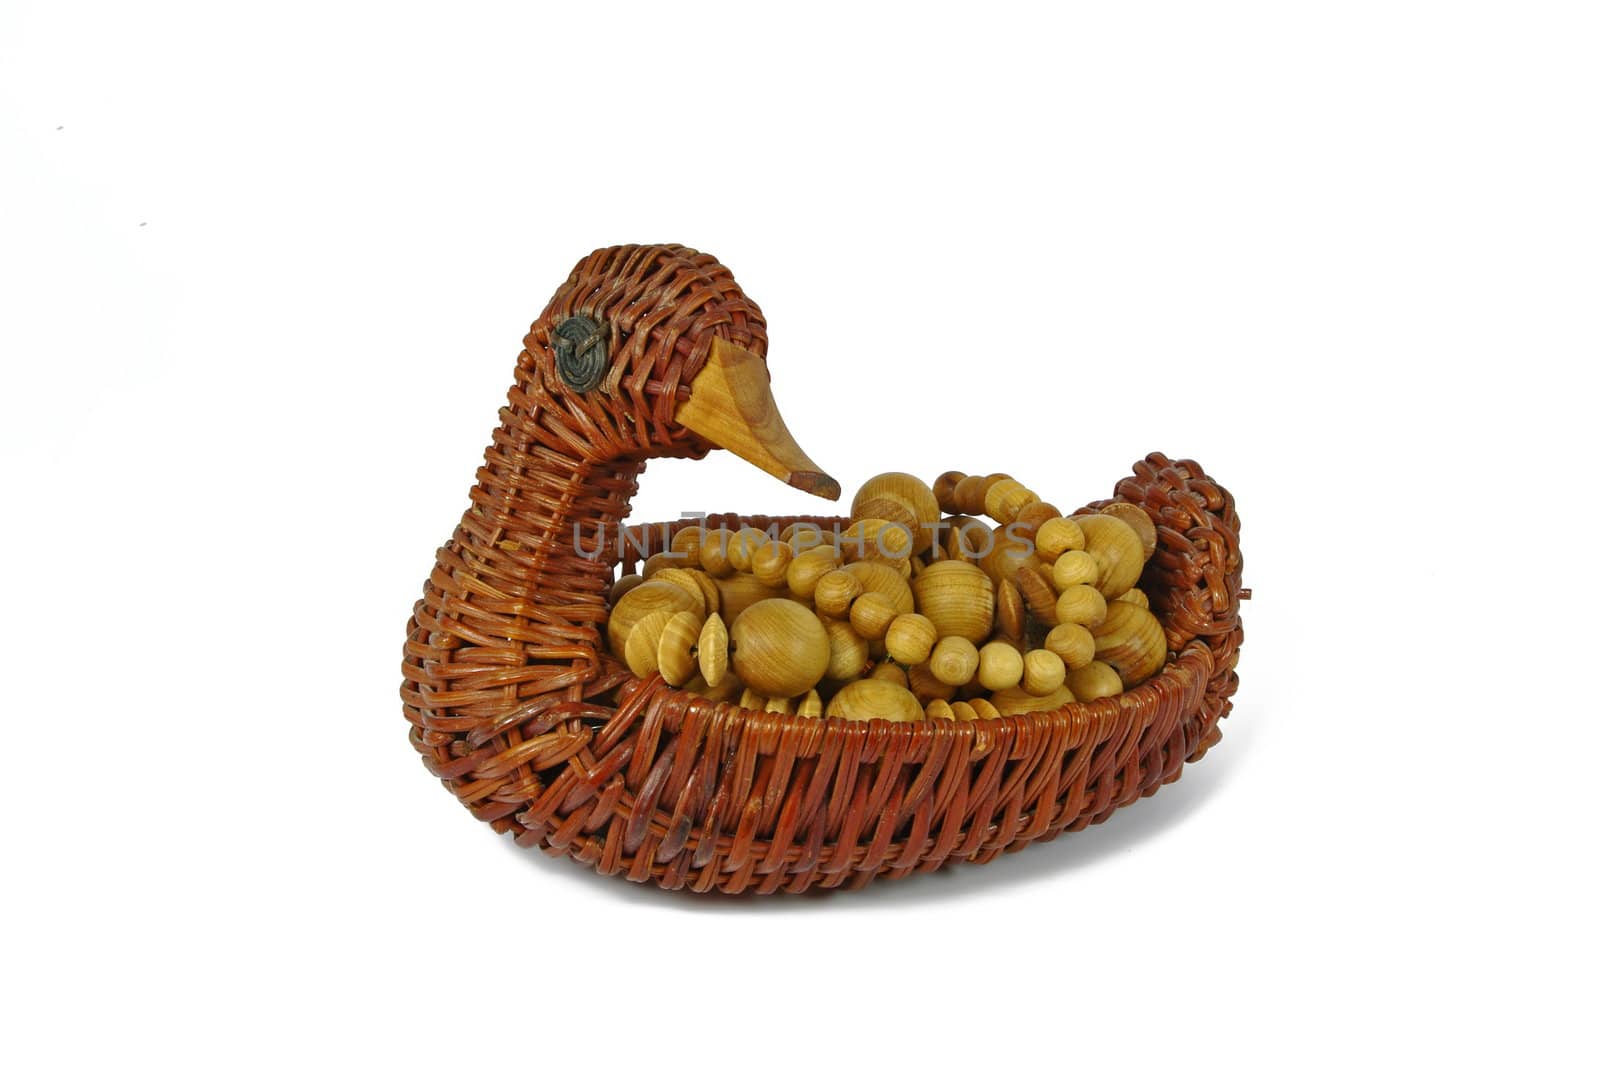 Wicker container in form of duck with wooden beads on white background